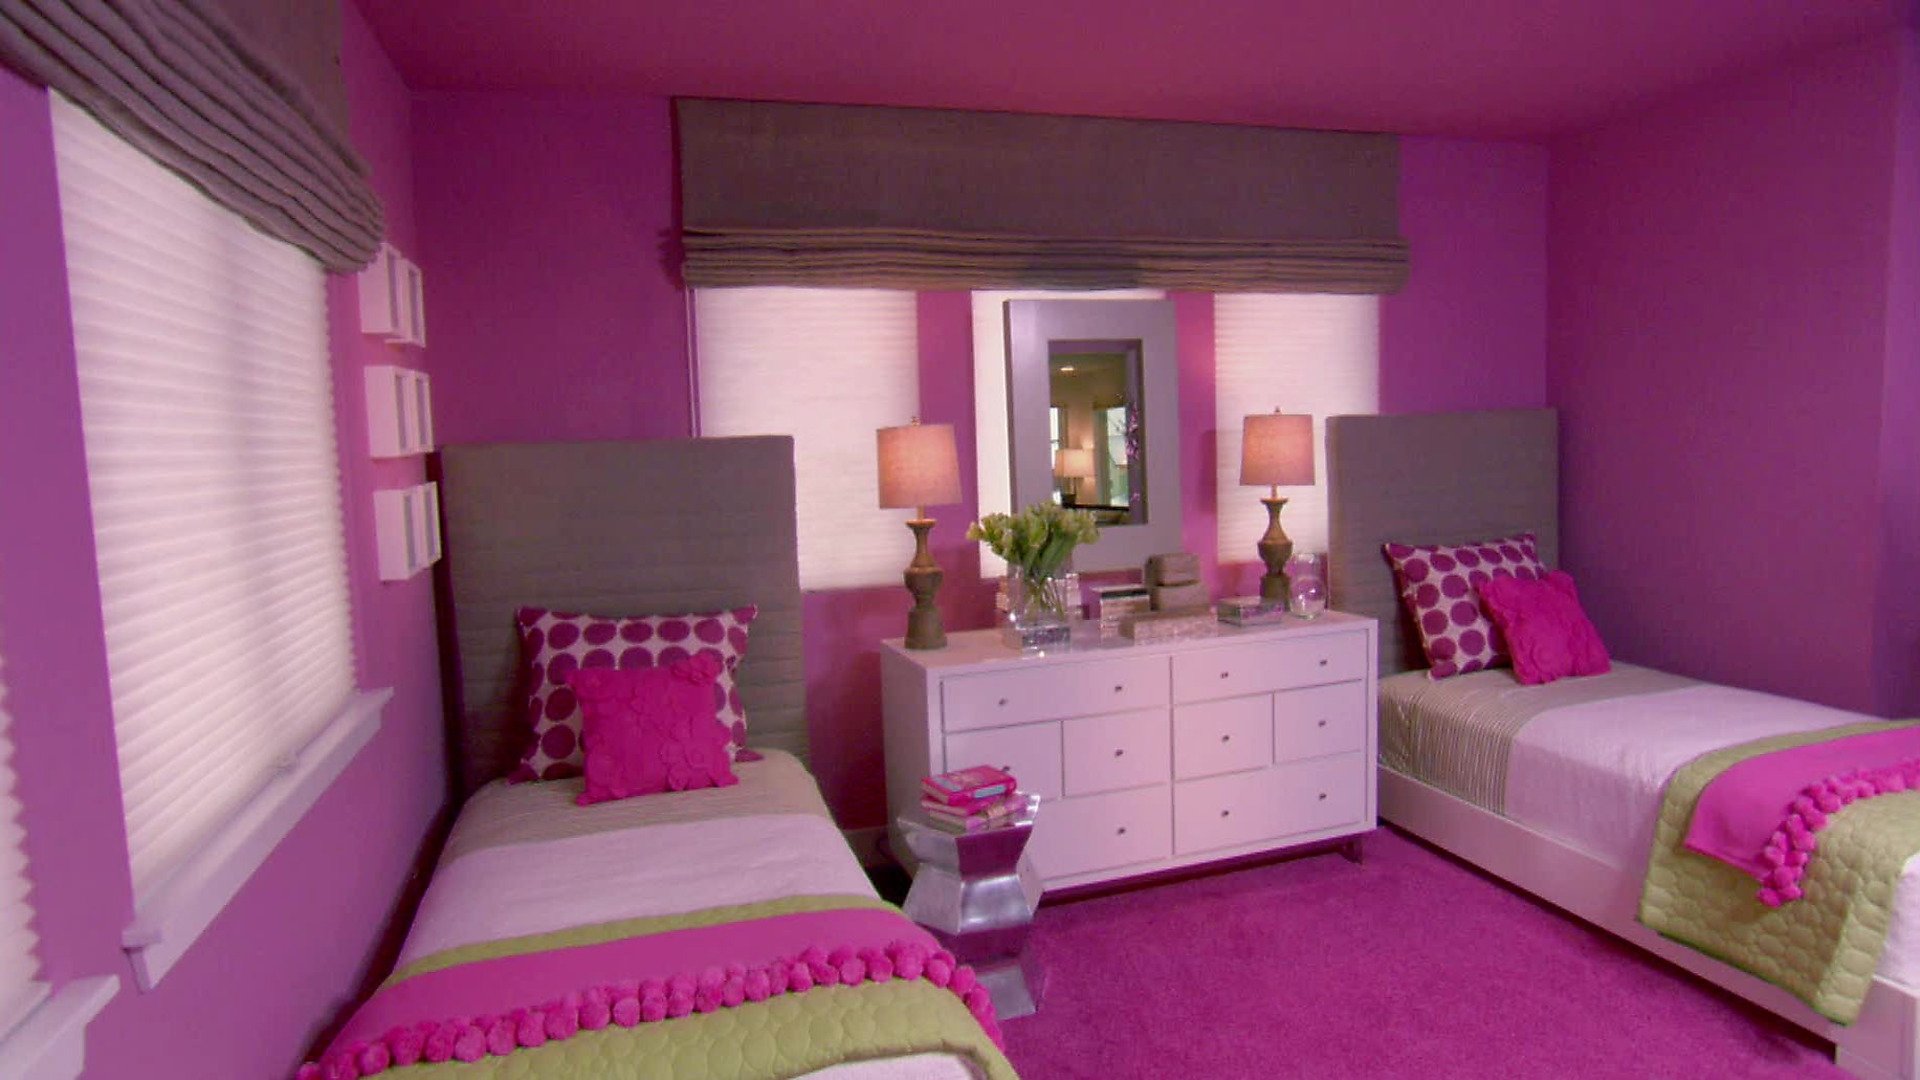 10 Pretty Paint Ideas For Girls Room girls bedroom color schemes pictures options ideas hgtv 2 2022